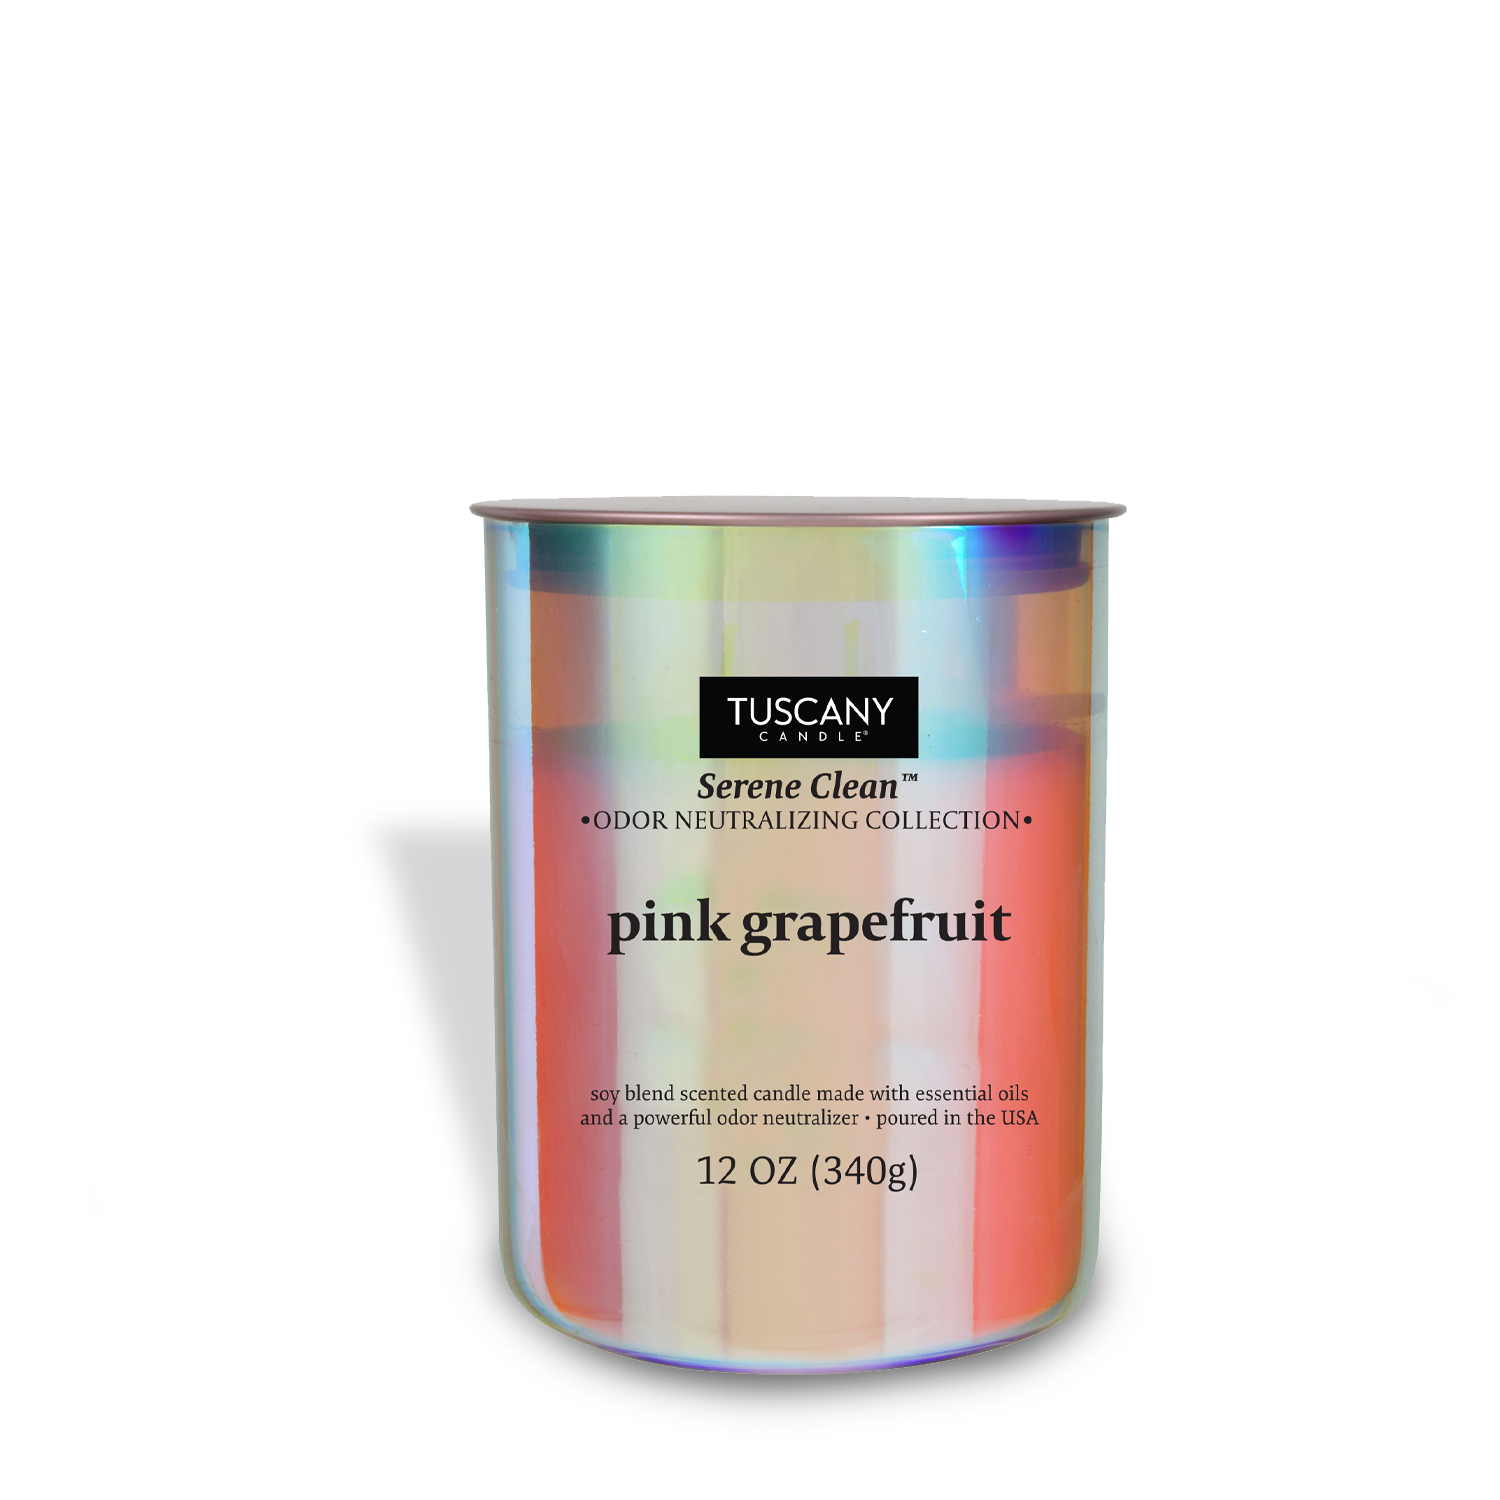 A Pink Grapefruit Scented Jar Candle (12 oz) from the Serene Clean Collection by Tuscany Candle® EVD for odor control on a white background.